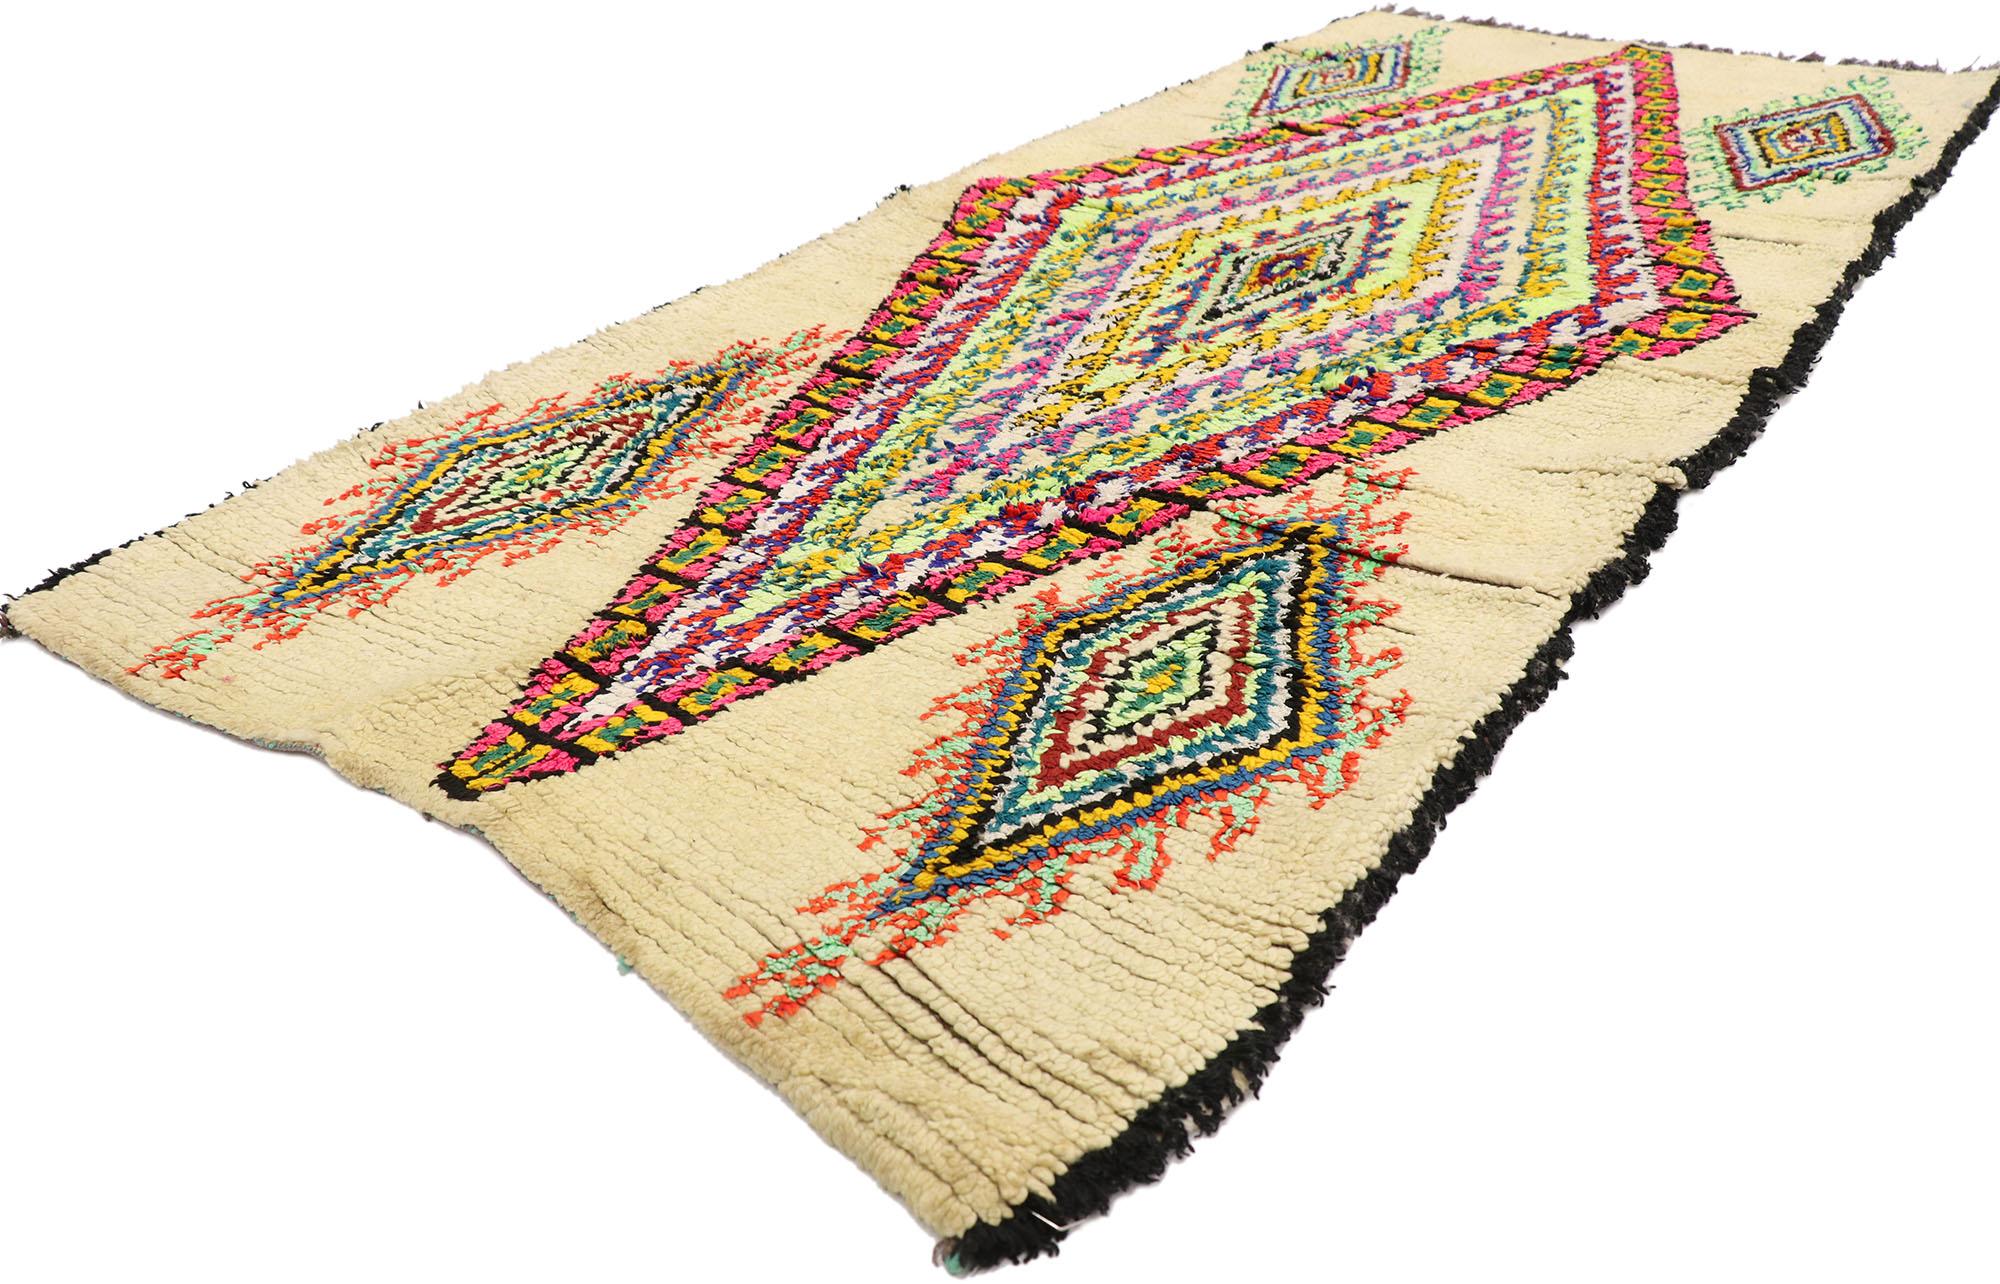 21535 Vintage Berber Moroccan Azilal Rug with Bohemian Tribal Style 03'02 x 07'01. Showcasing a bold expressive tribal design, incredible detail and texture, this hand knotted wool vintage Berber Moroccan Azilal rug is a captivating vision of woven